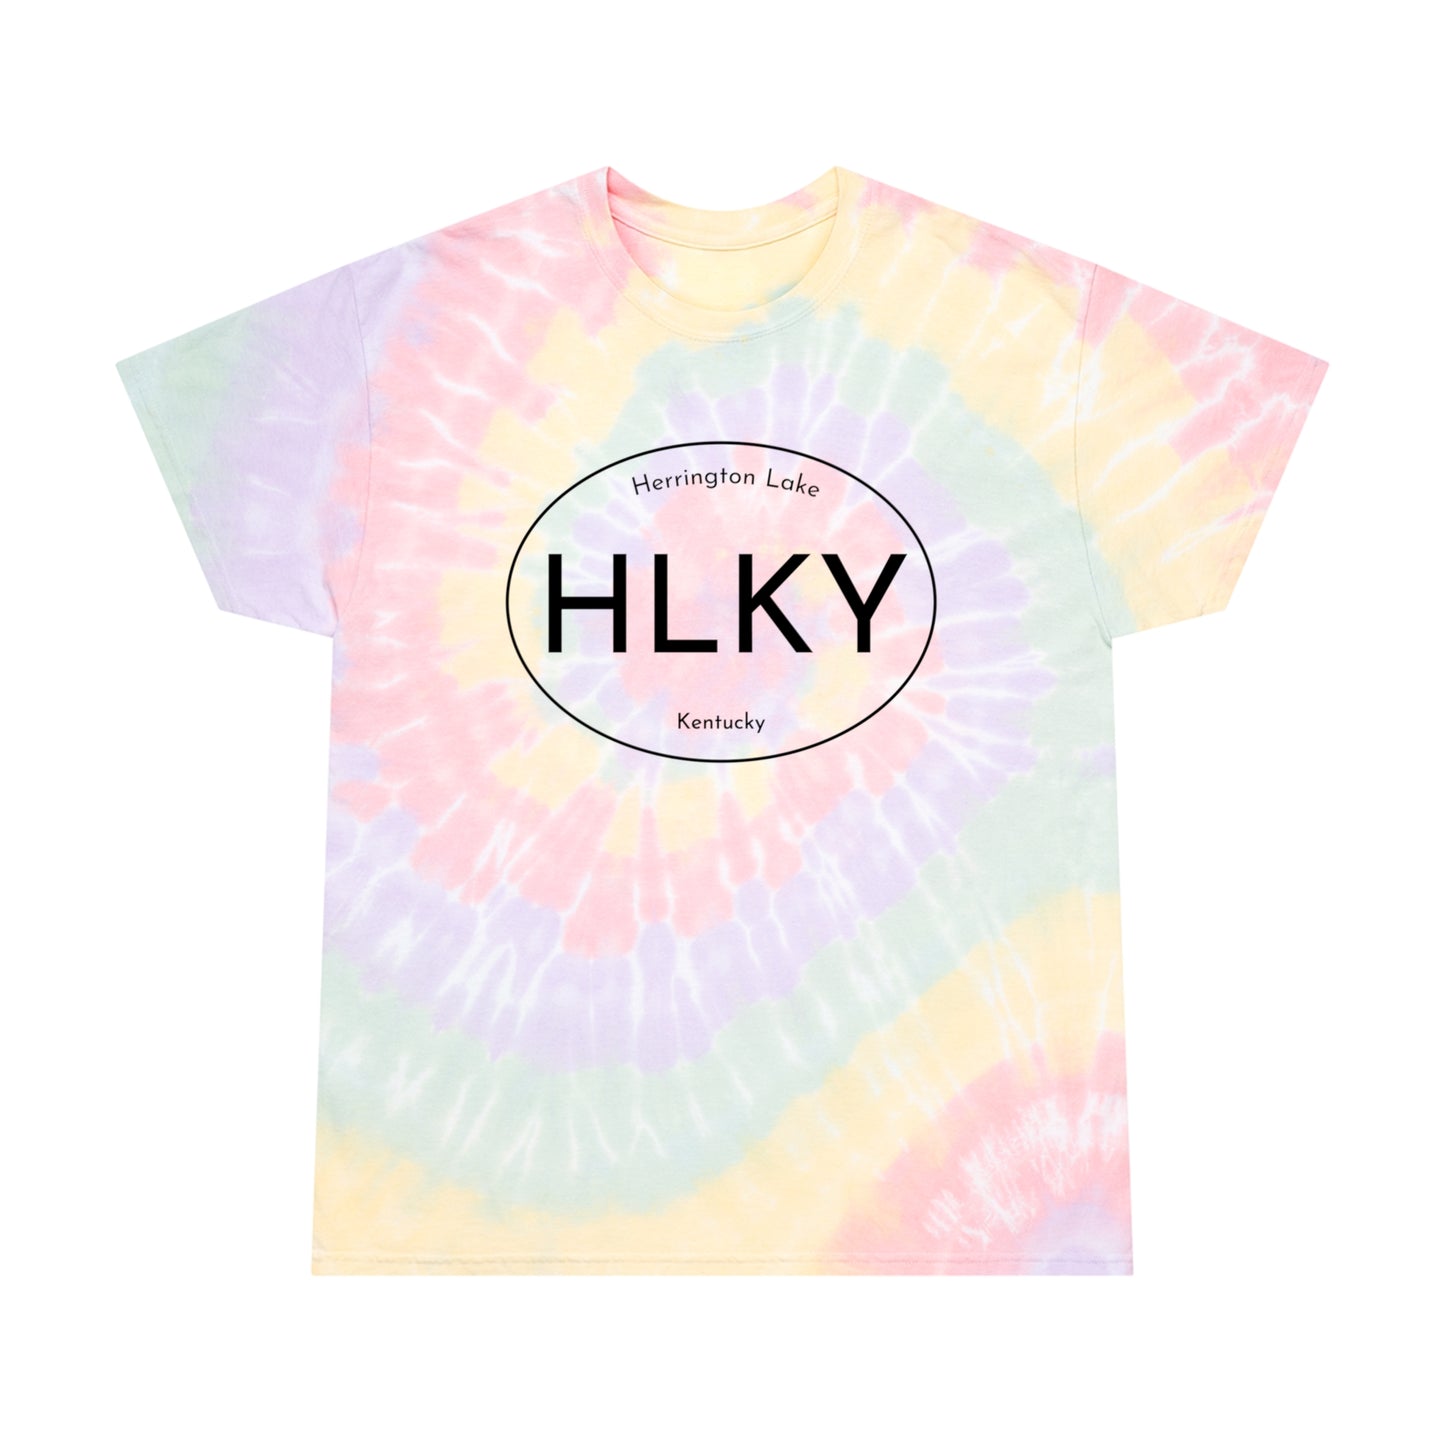 HLKY Travel Decal Tie-Dye Tee, Spiral